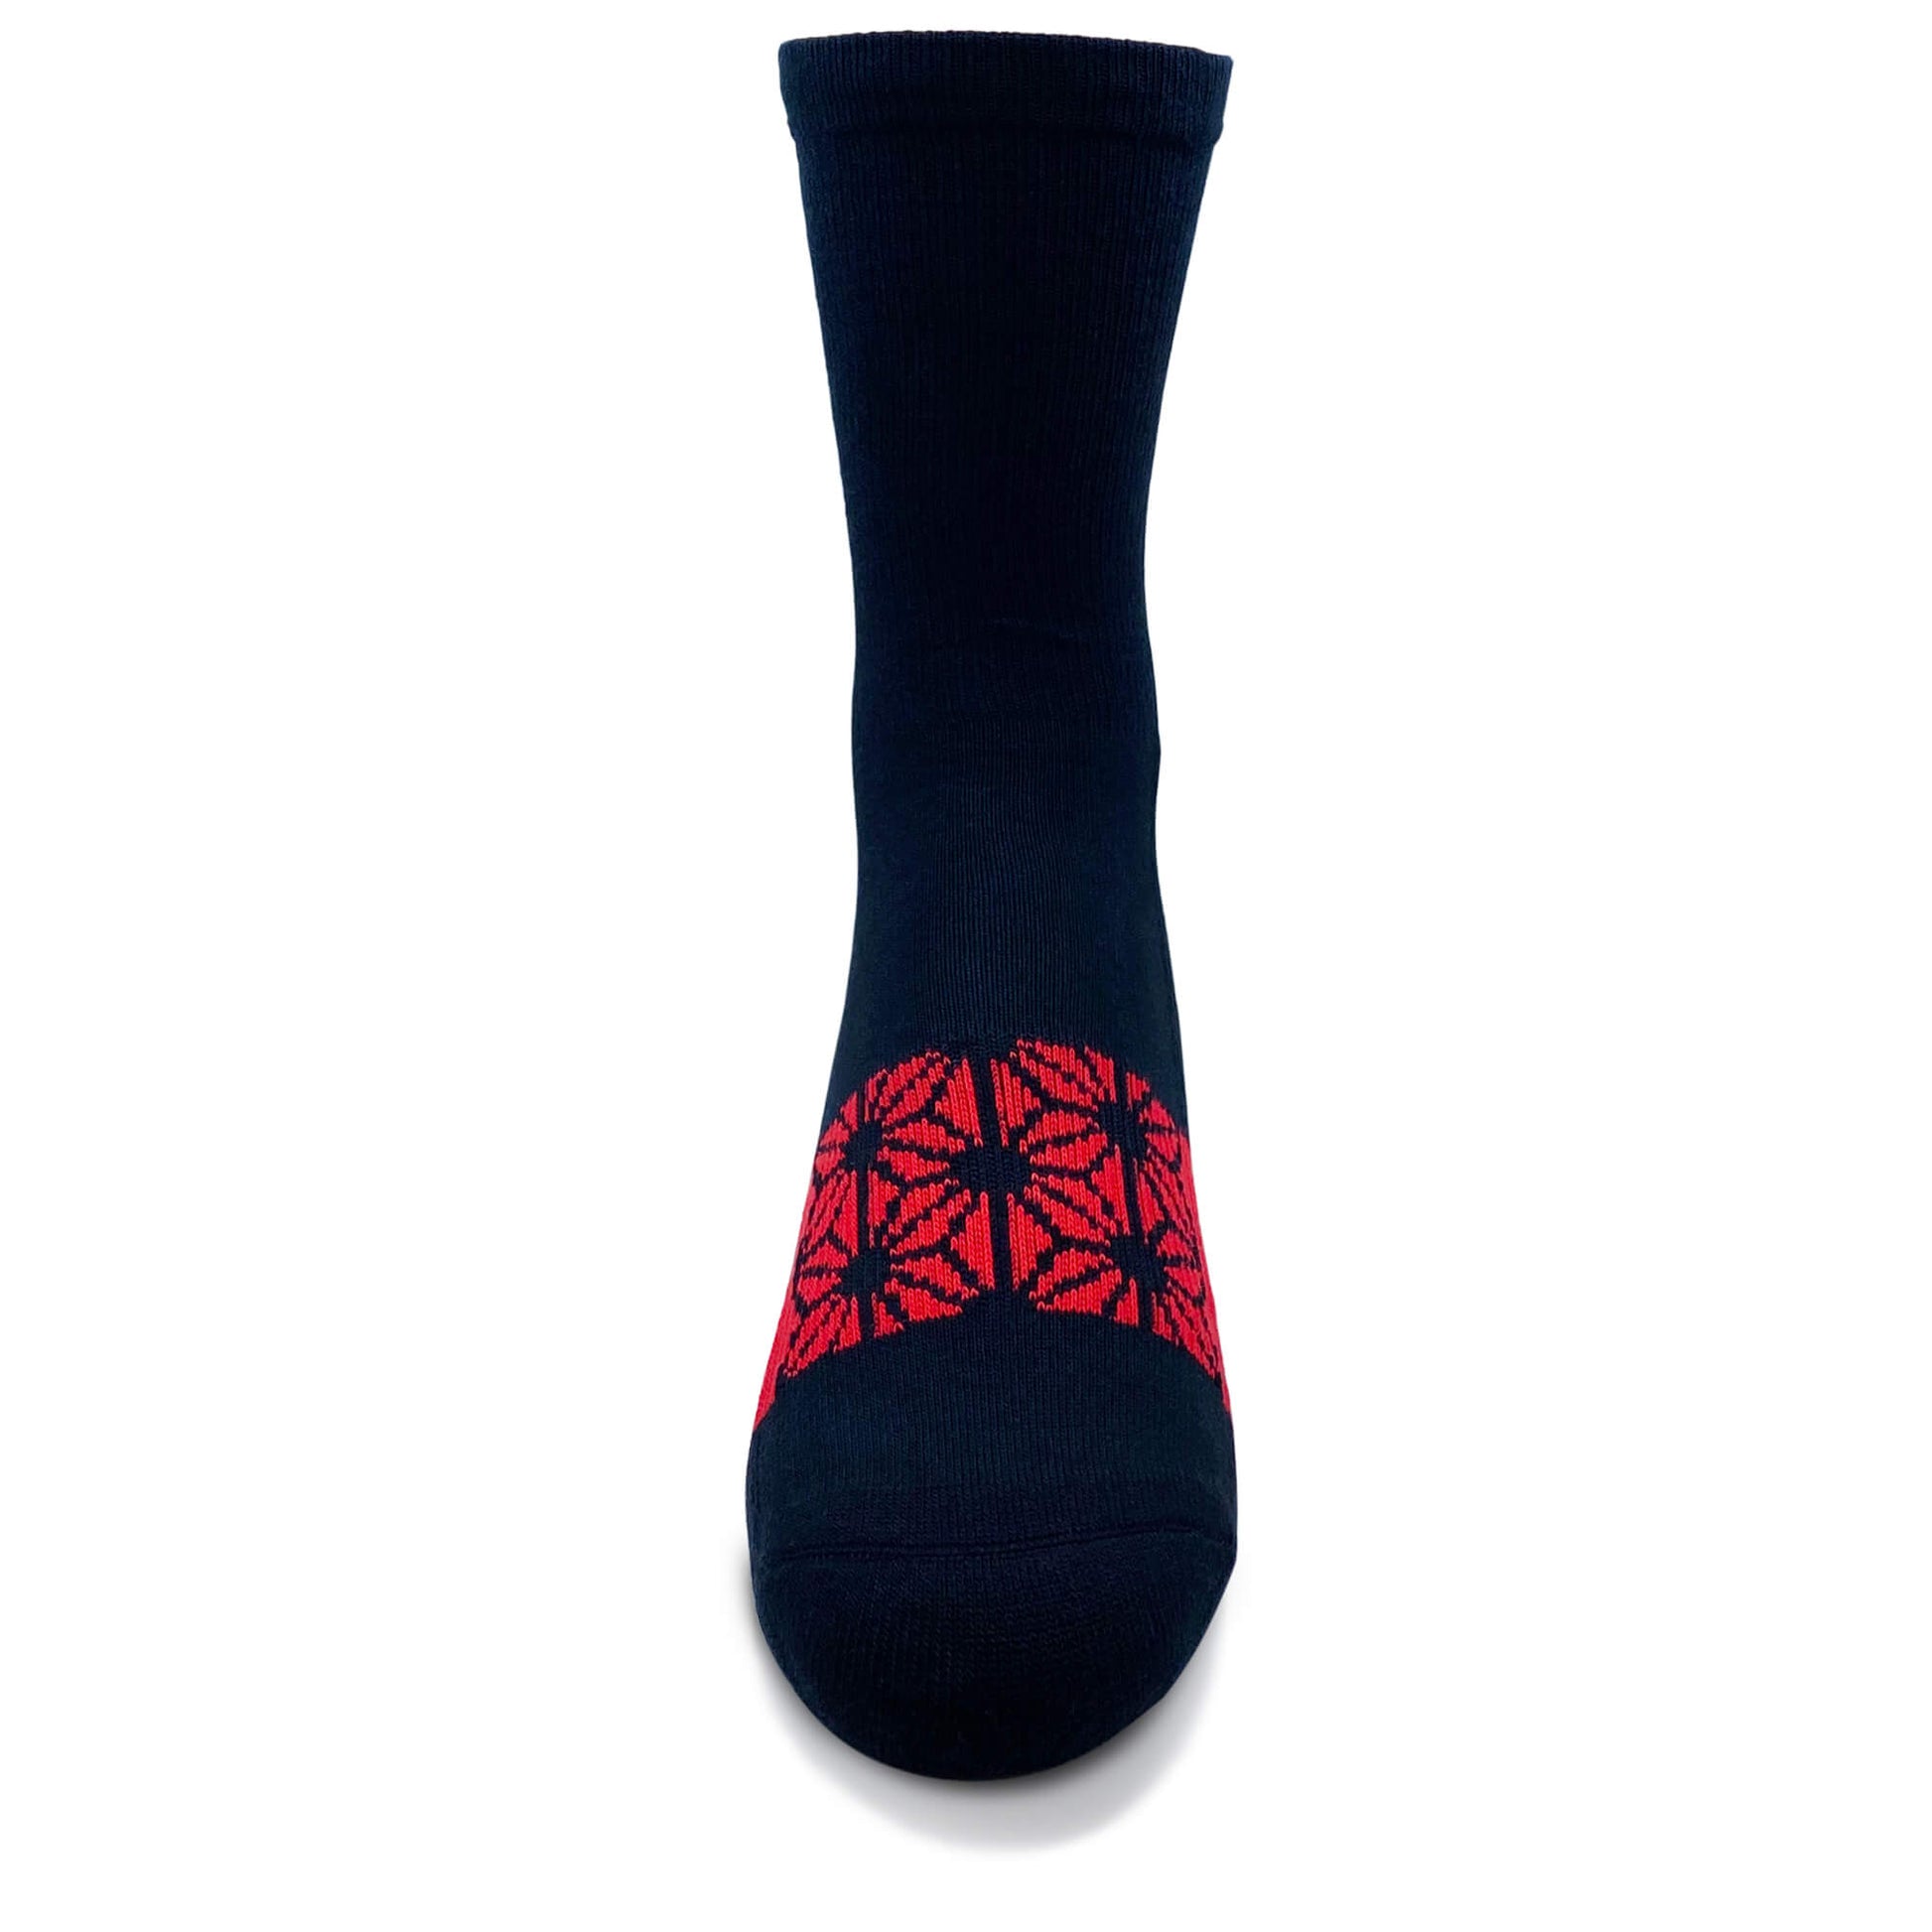 Modern Envy comfy crew sock Black with Red front view